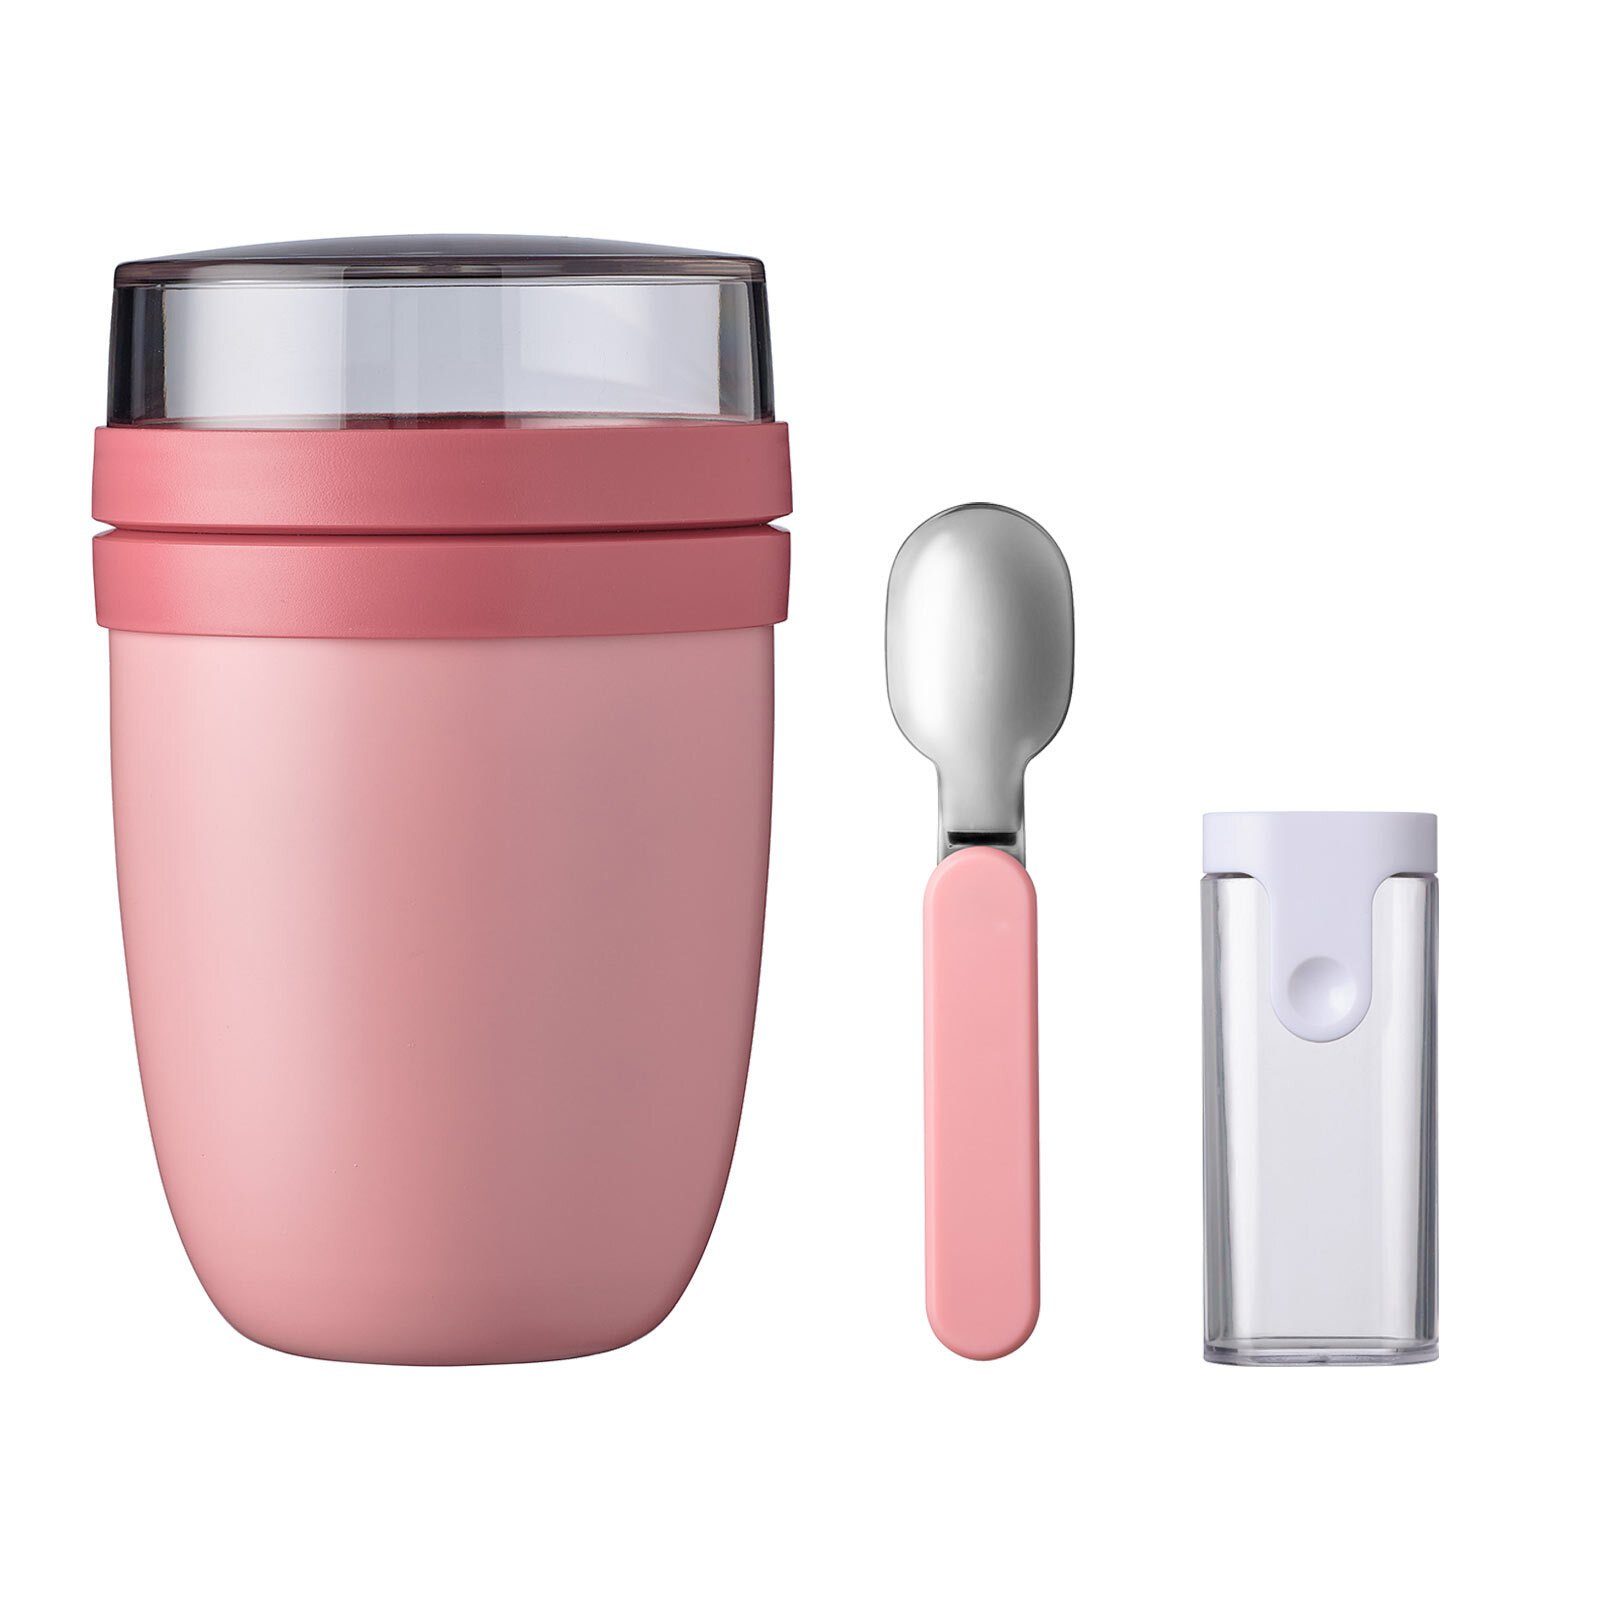 Mepal Lunchbox Ellipse Thermo-Lunchpot + Nordic Pink (3-tlg) Löffel, Material-Mix, Faltbarer